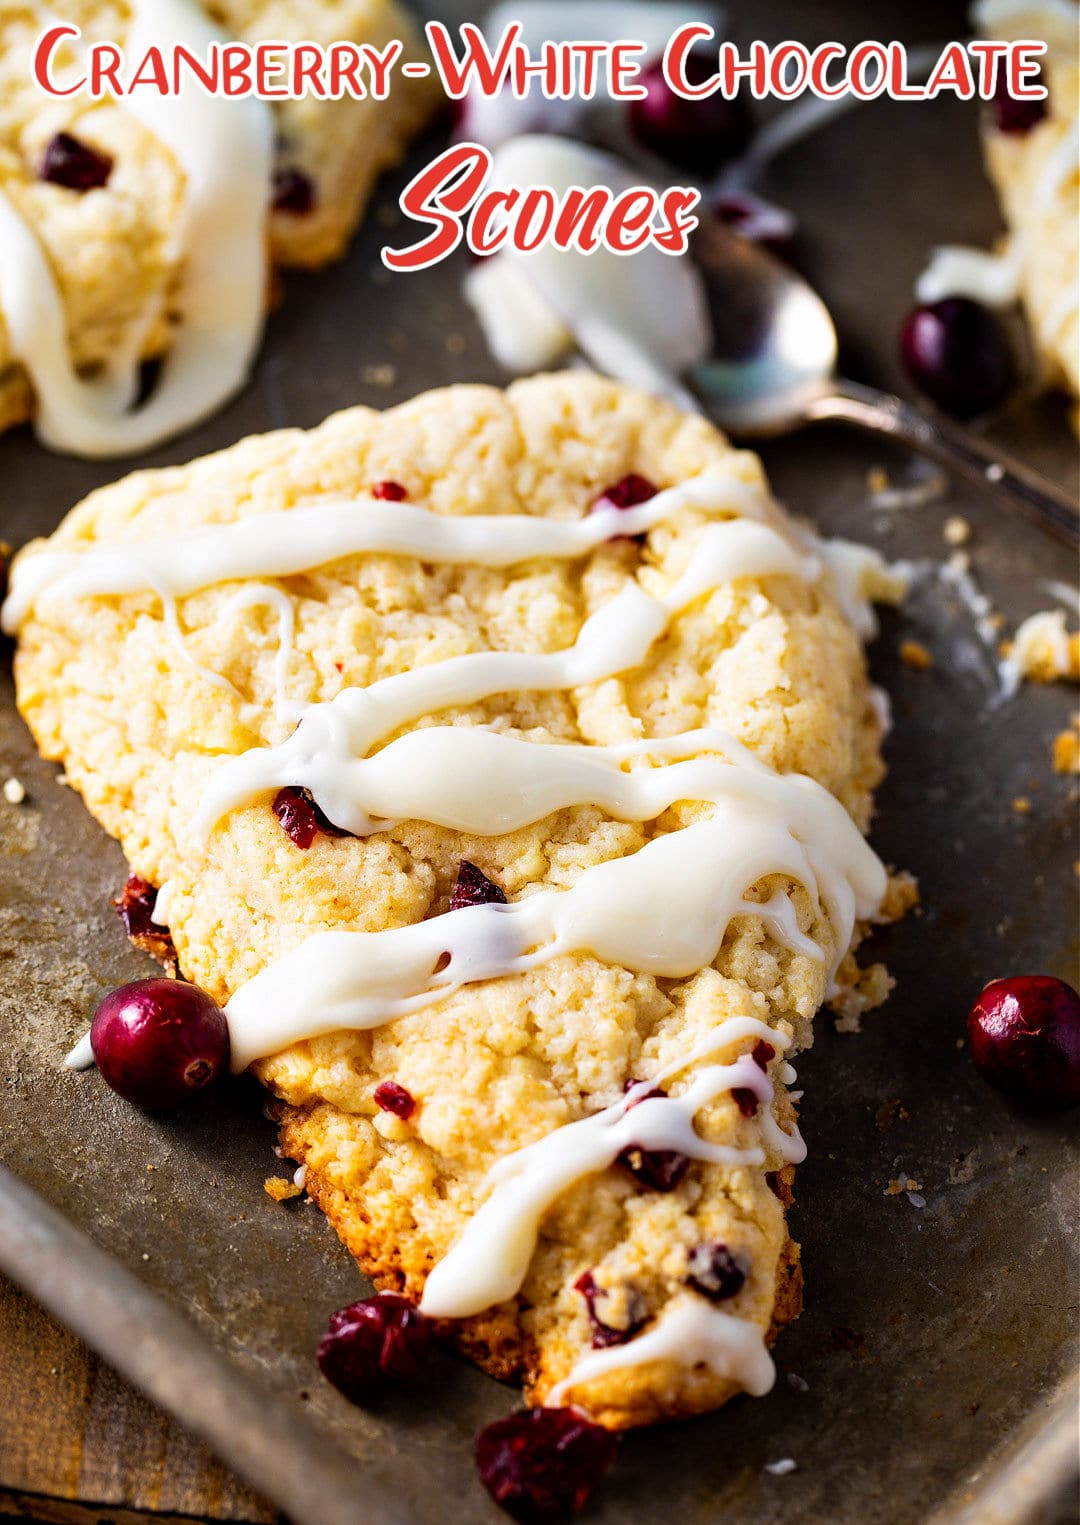 Cranberry-White Chocolate Scone covered with glaze.